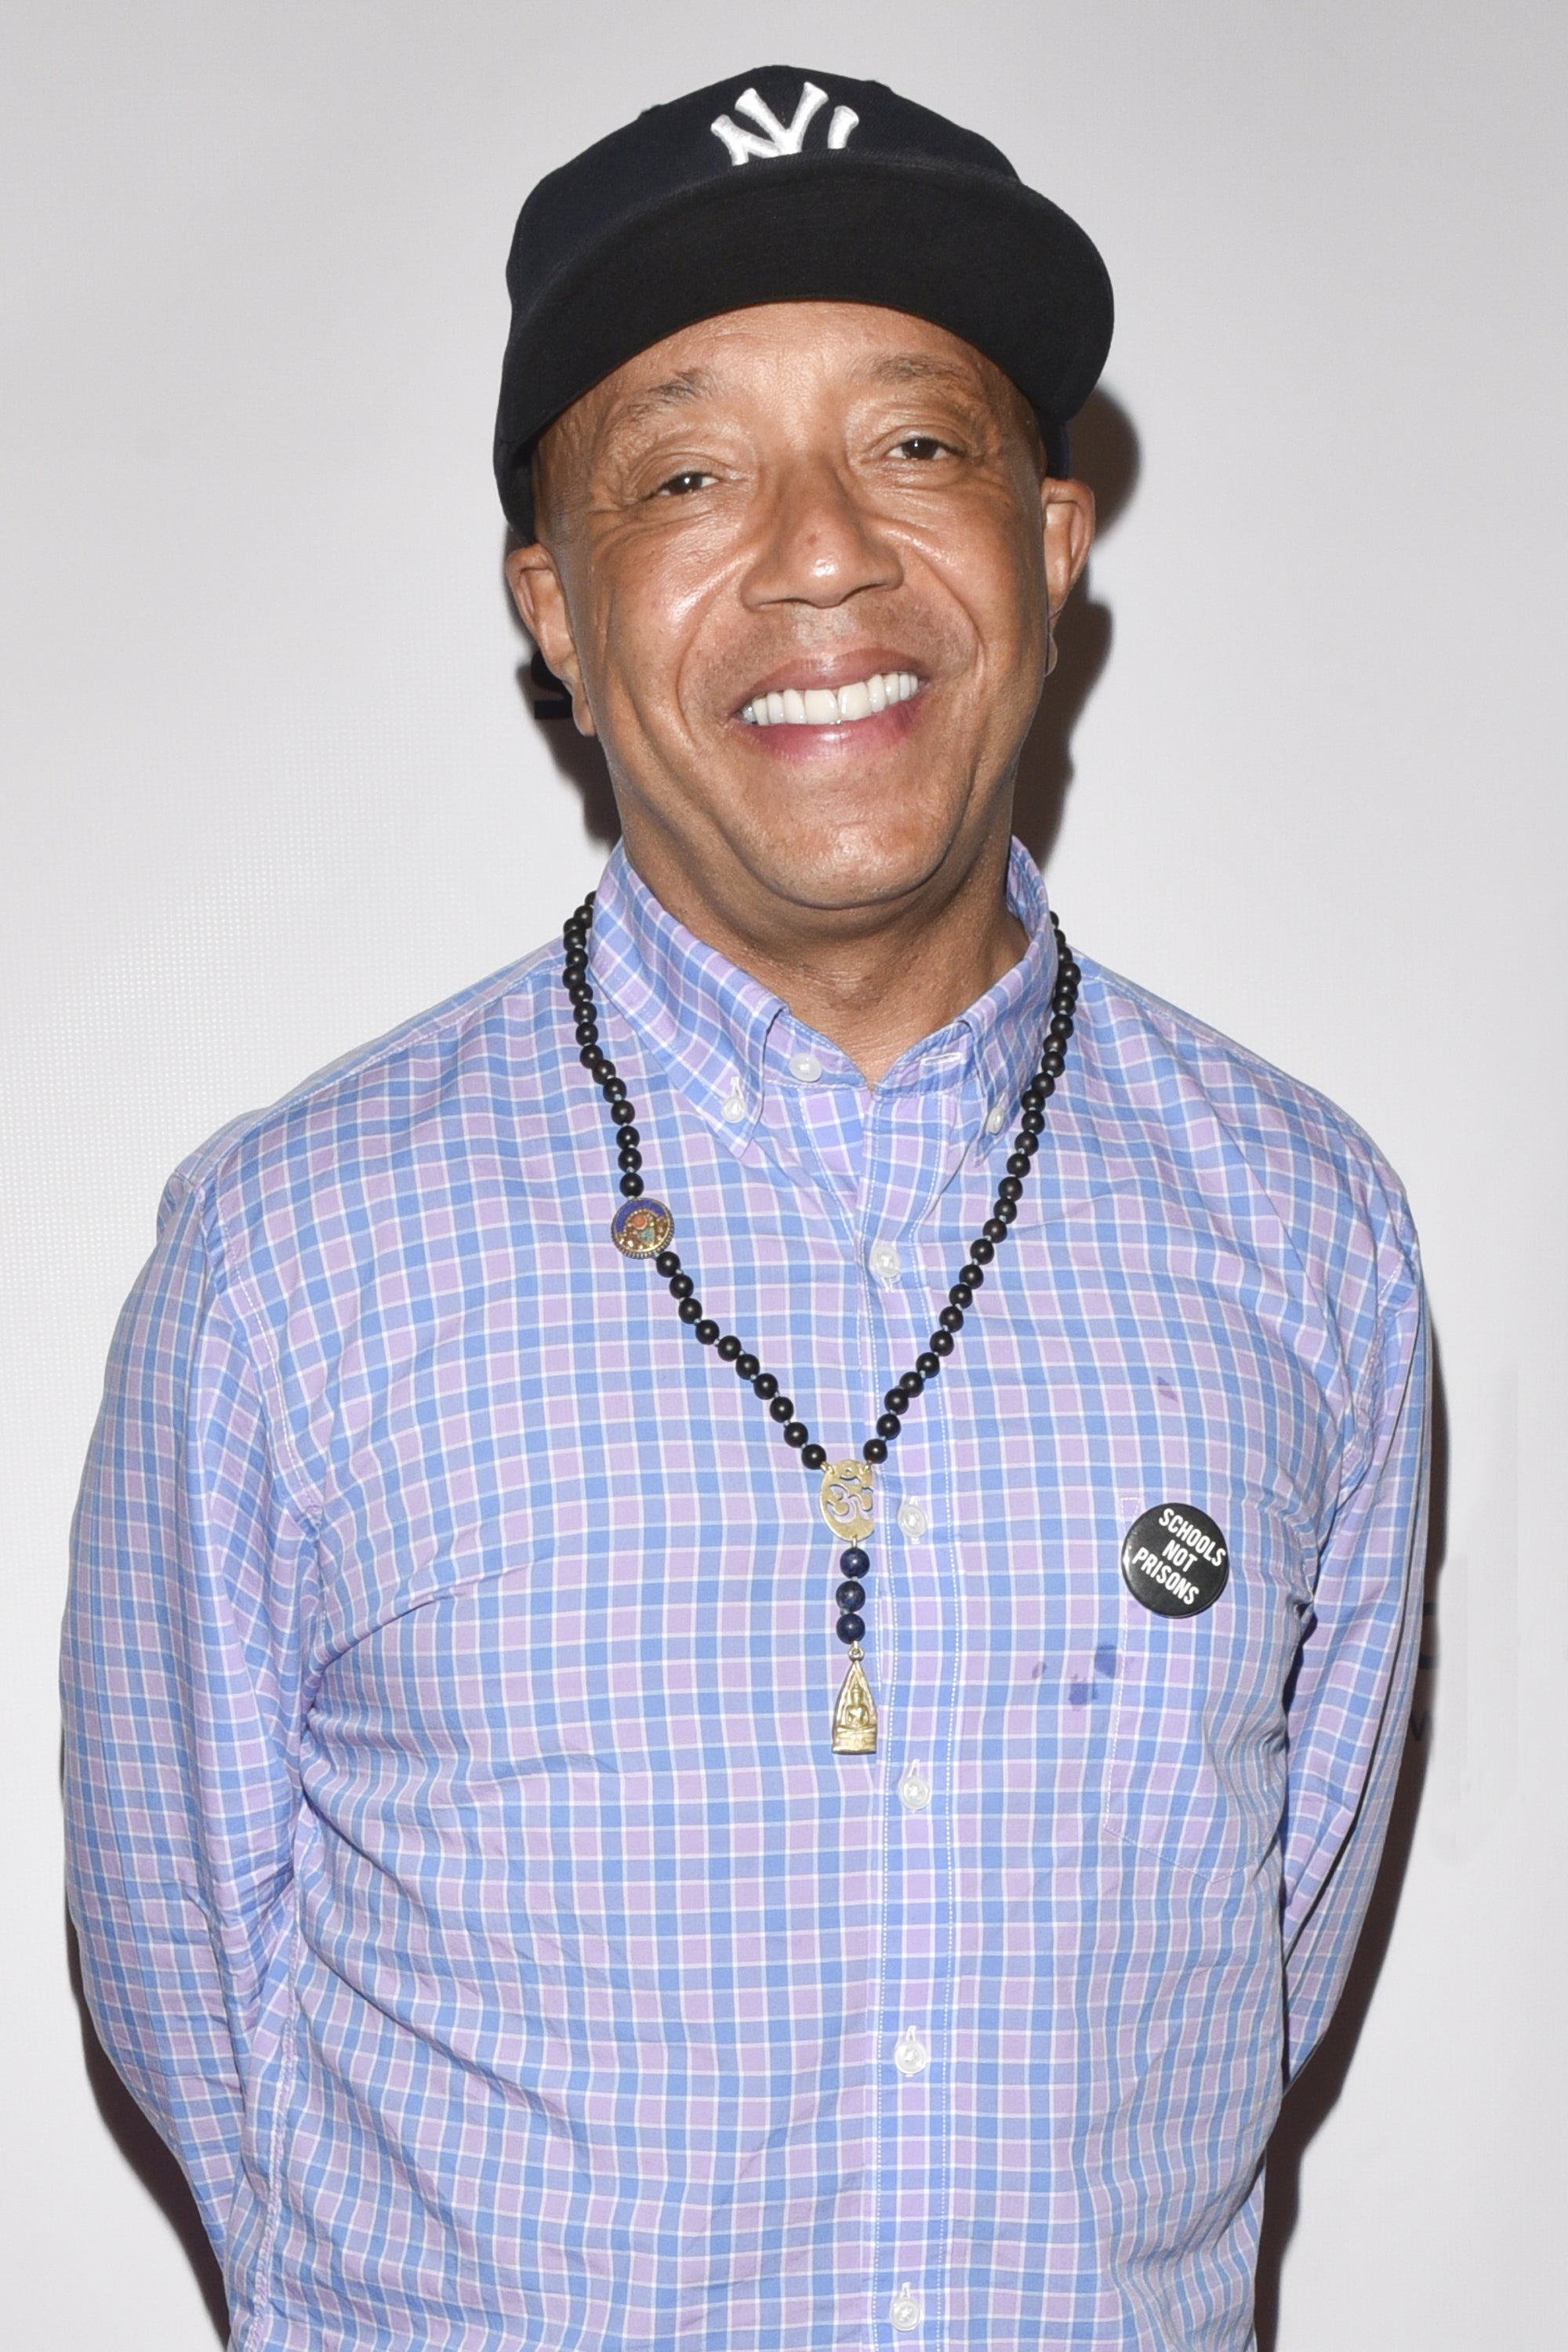 Russell Simmons Accuser Recalls Being 'Pinned Down' And Raped By Media Mogul
